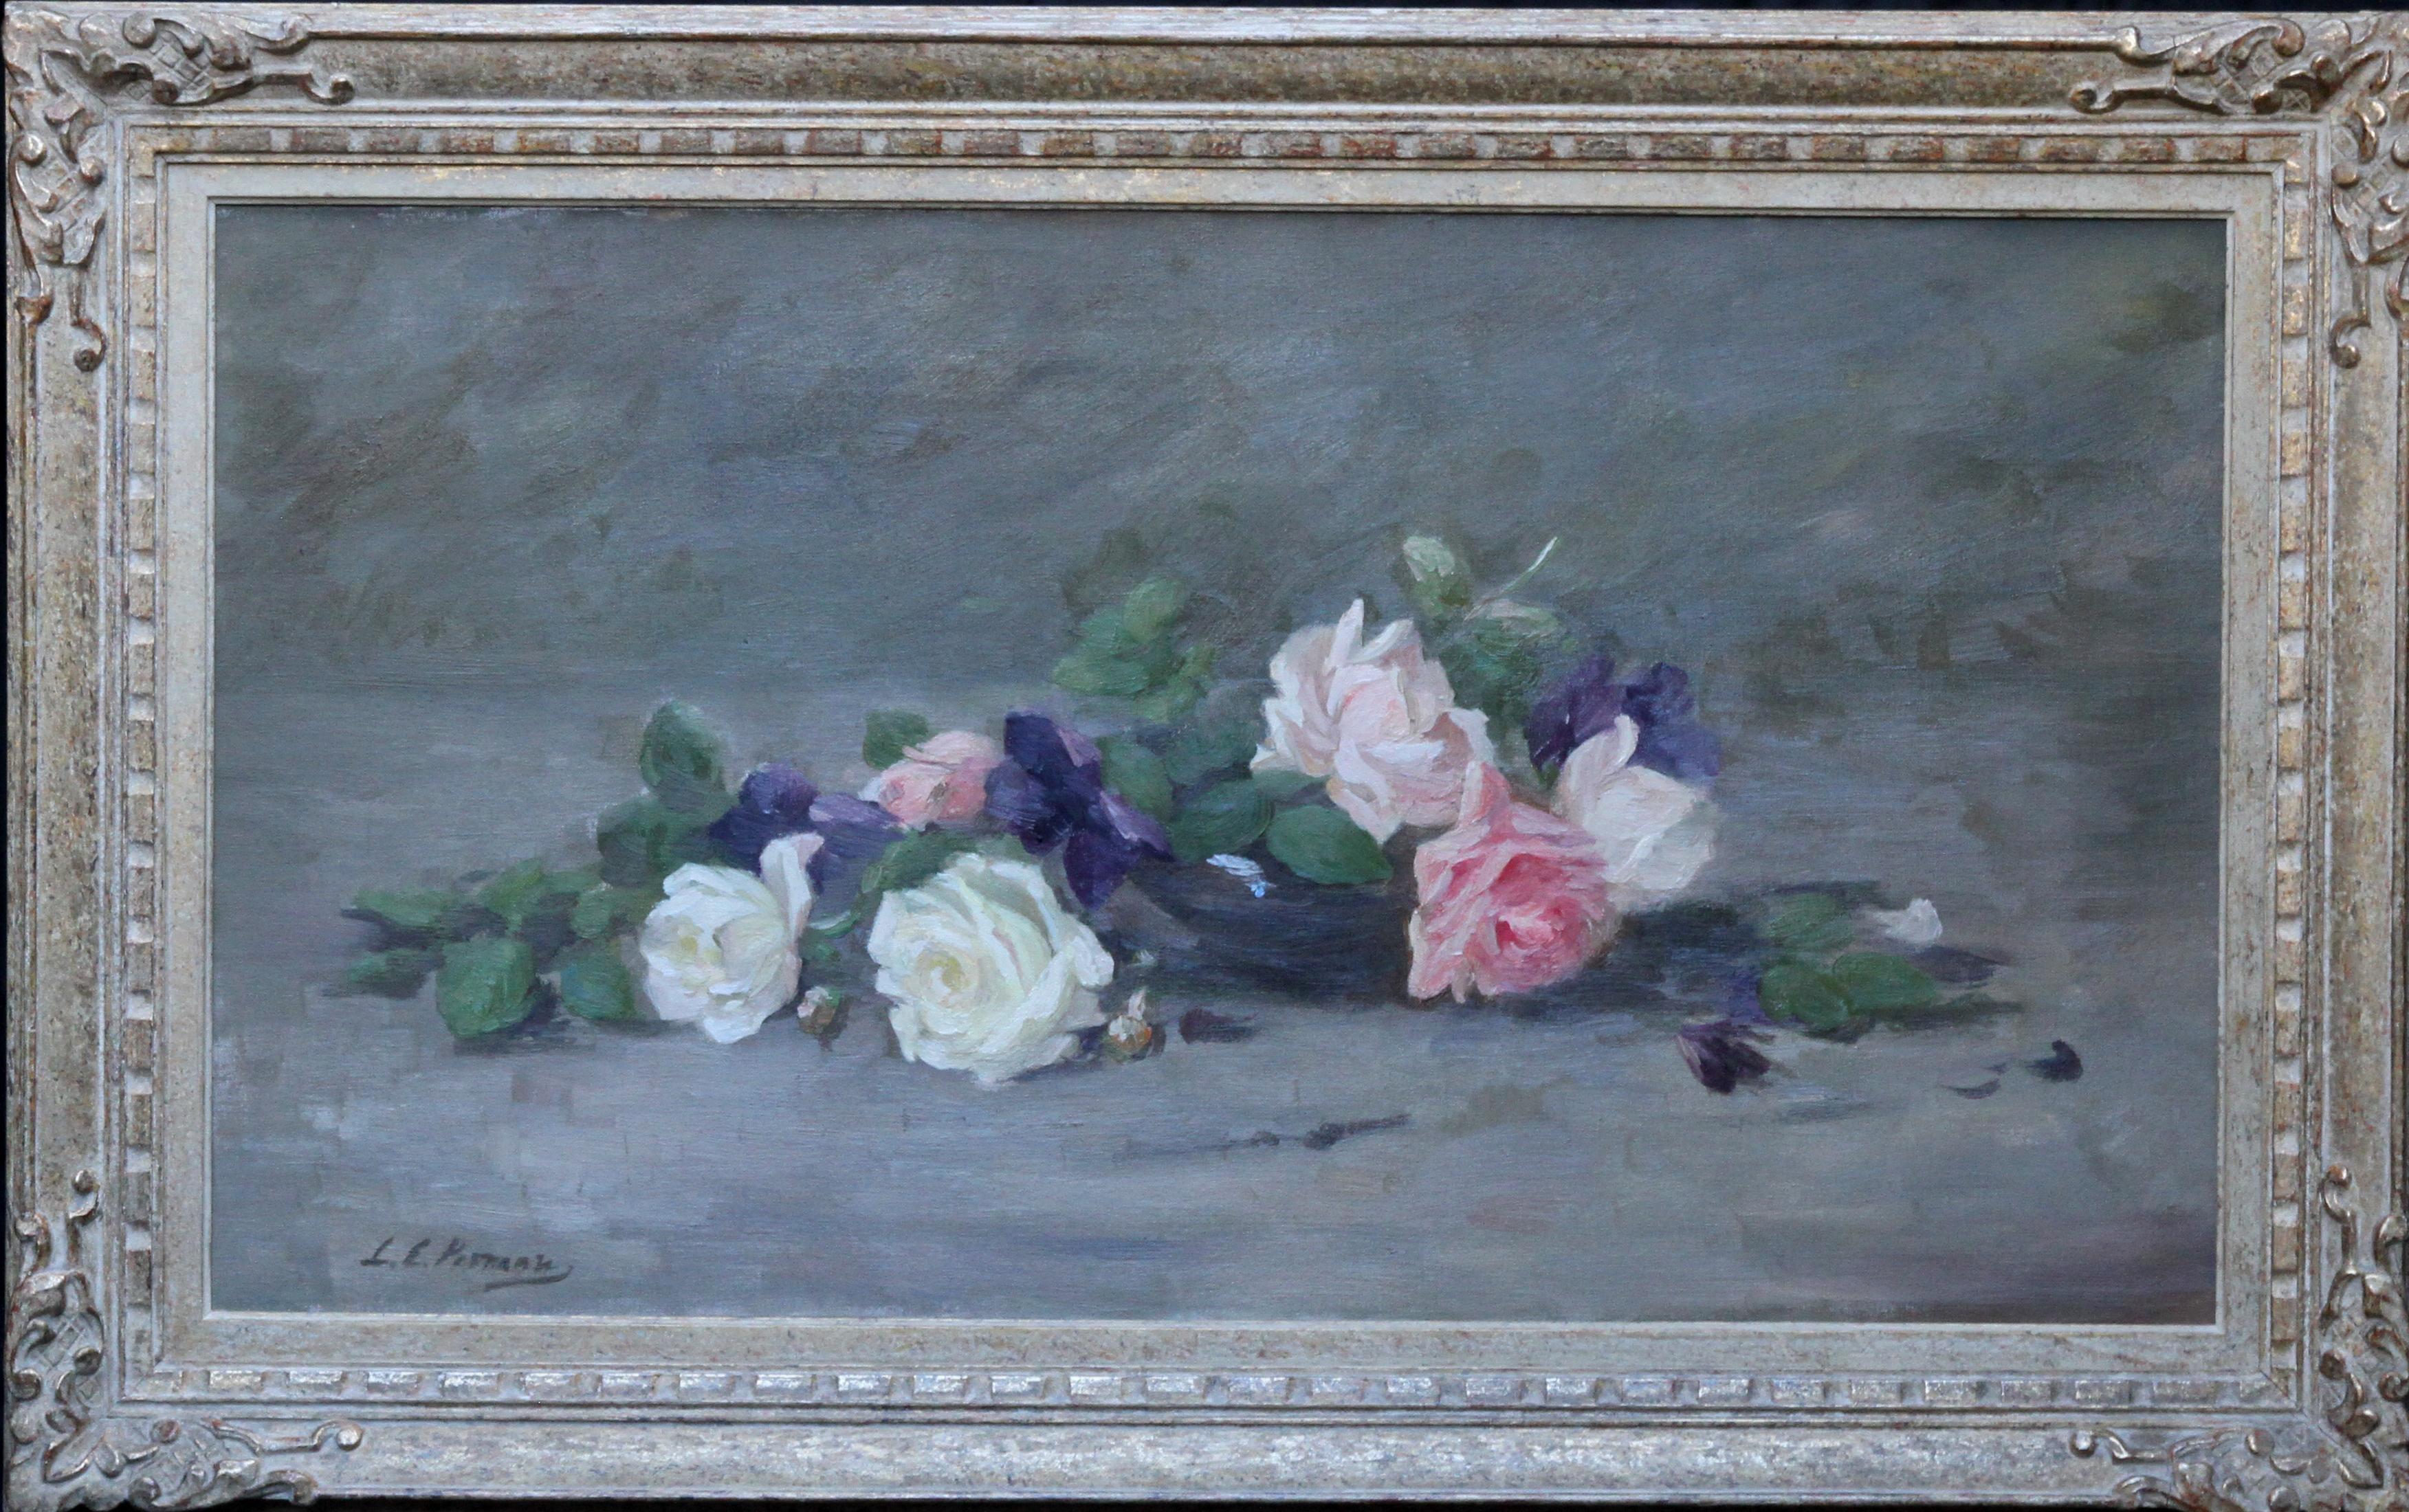 Louise Ellen Perman Still-Life Painting - Roses and Violets - Scottish Edwardian art floral oil painting exhib 1908 RSA